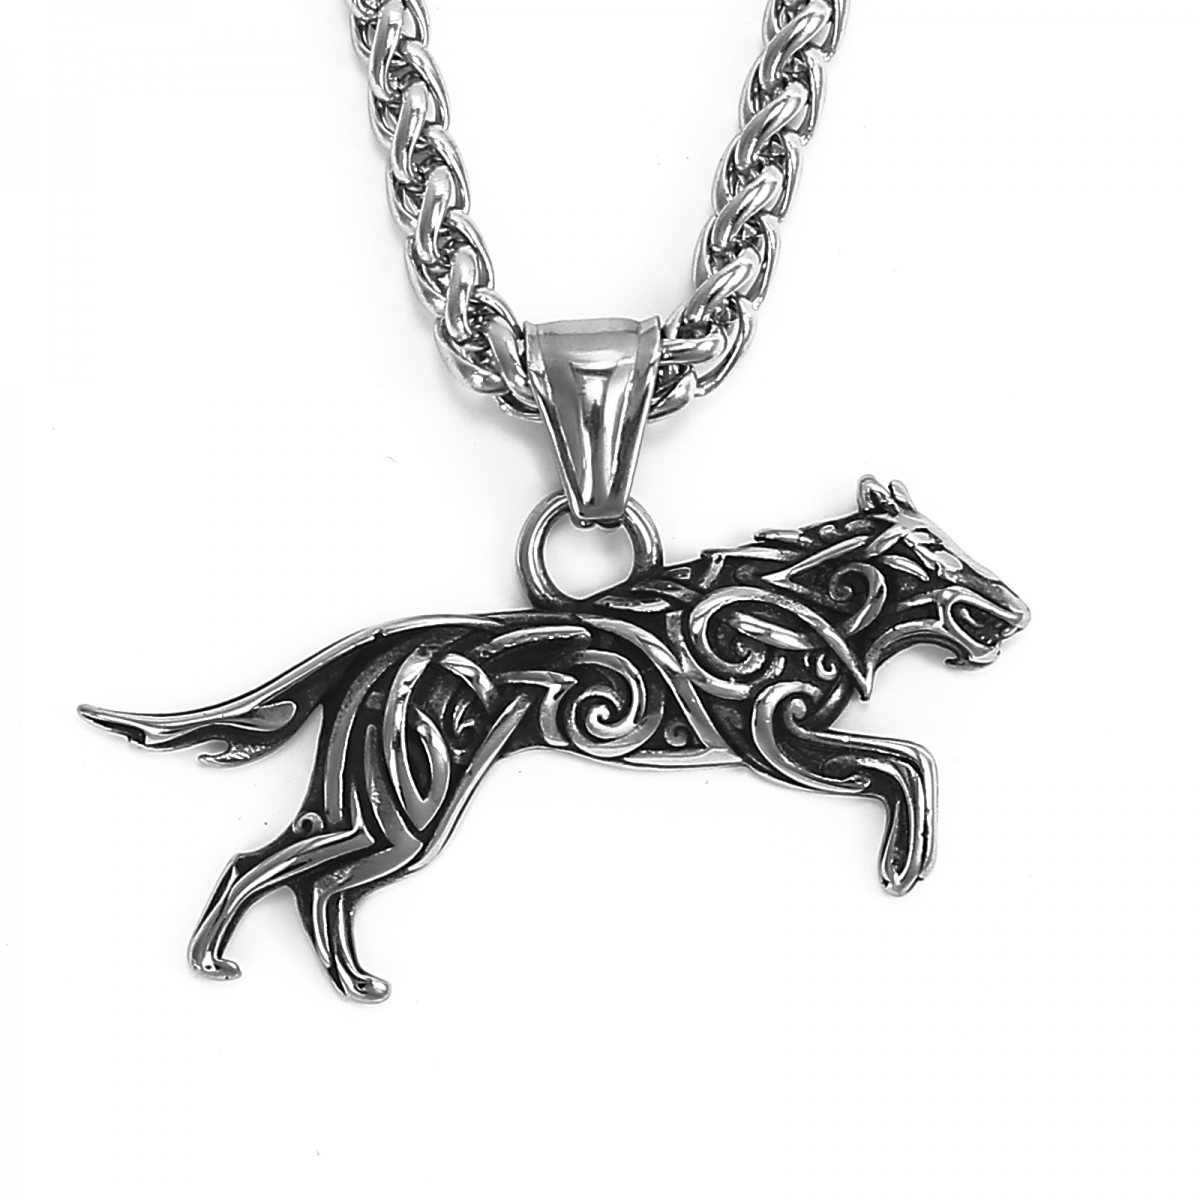 Viking Wolf Necklace US$2.9/PC-NORSECOLLECTION- Viking Jewelry,Viking Necklace,Viking Bracelet,Viking Rings,Viking Mugs,Viking Accessories,Viking Crafts